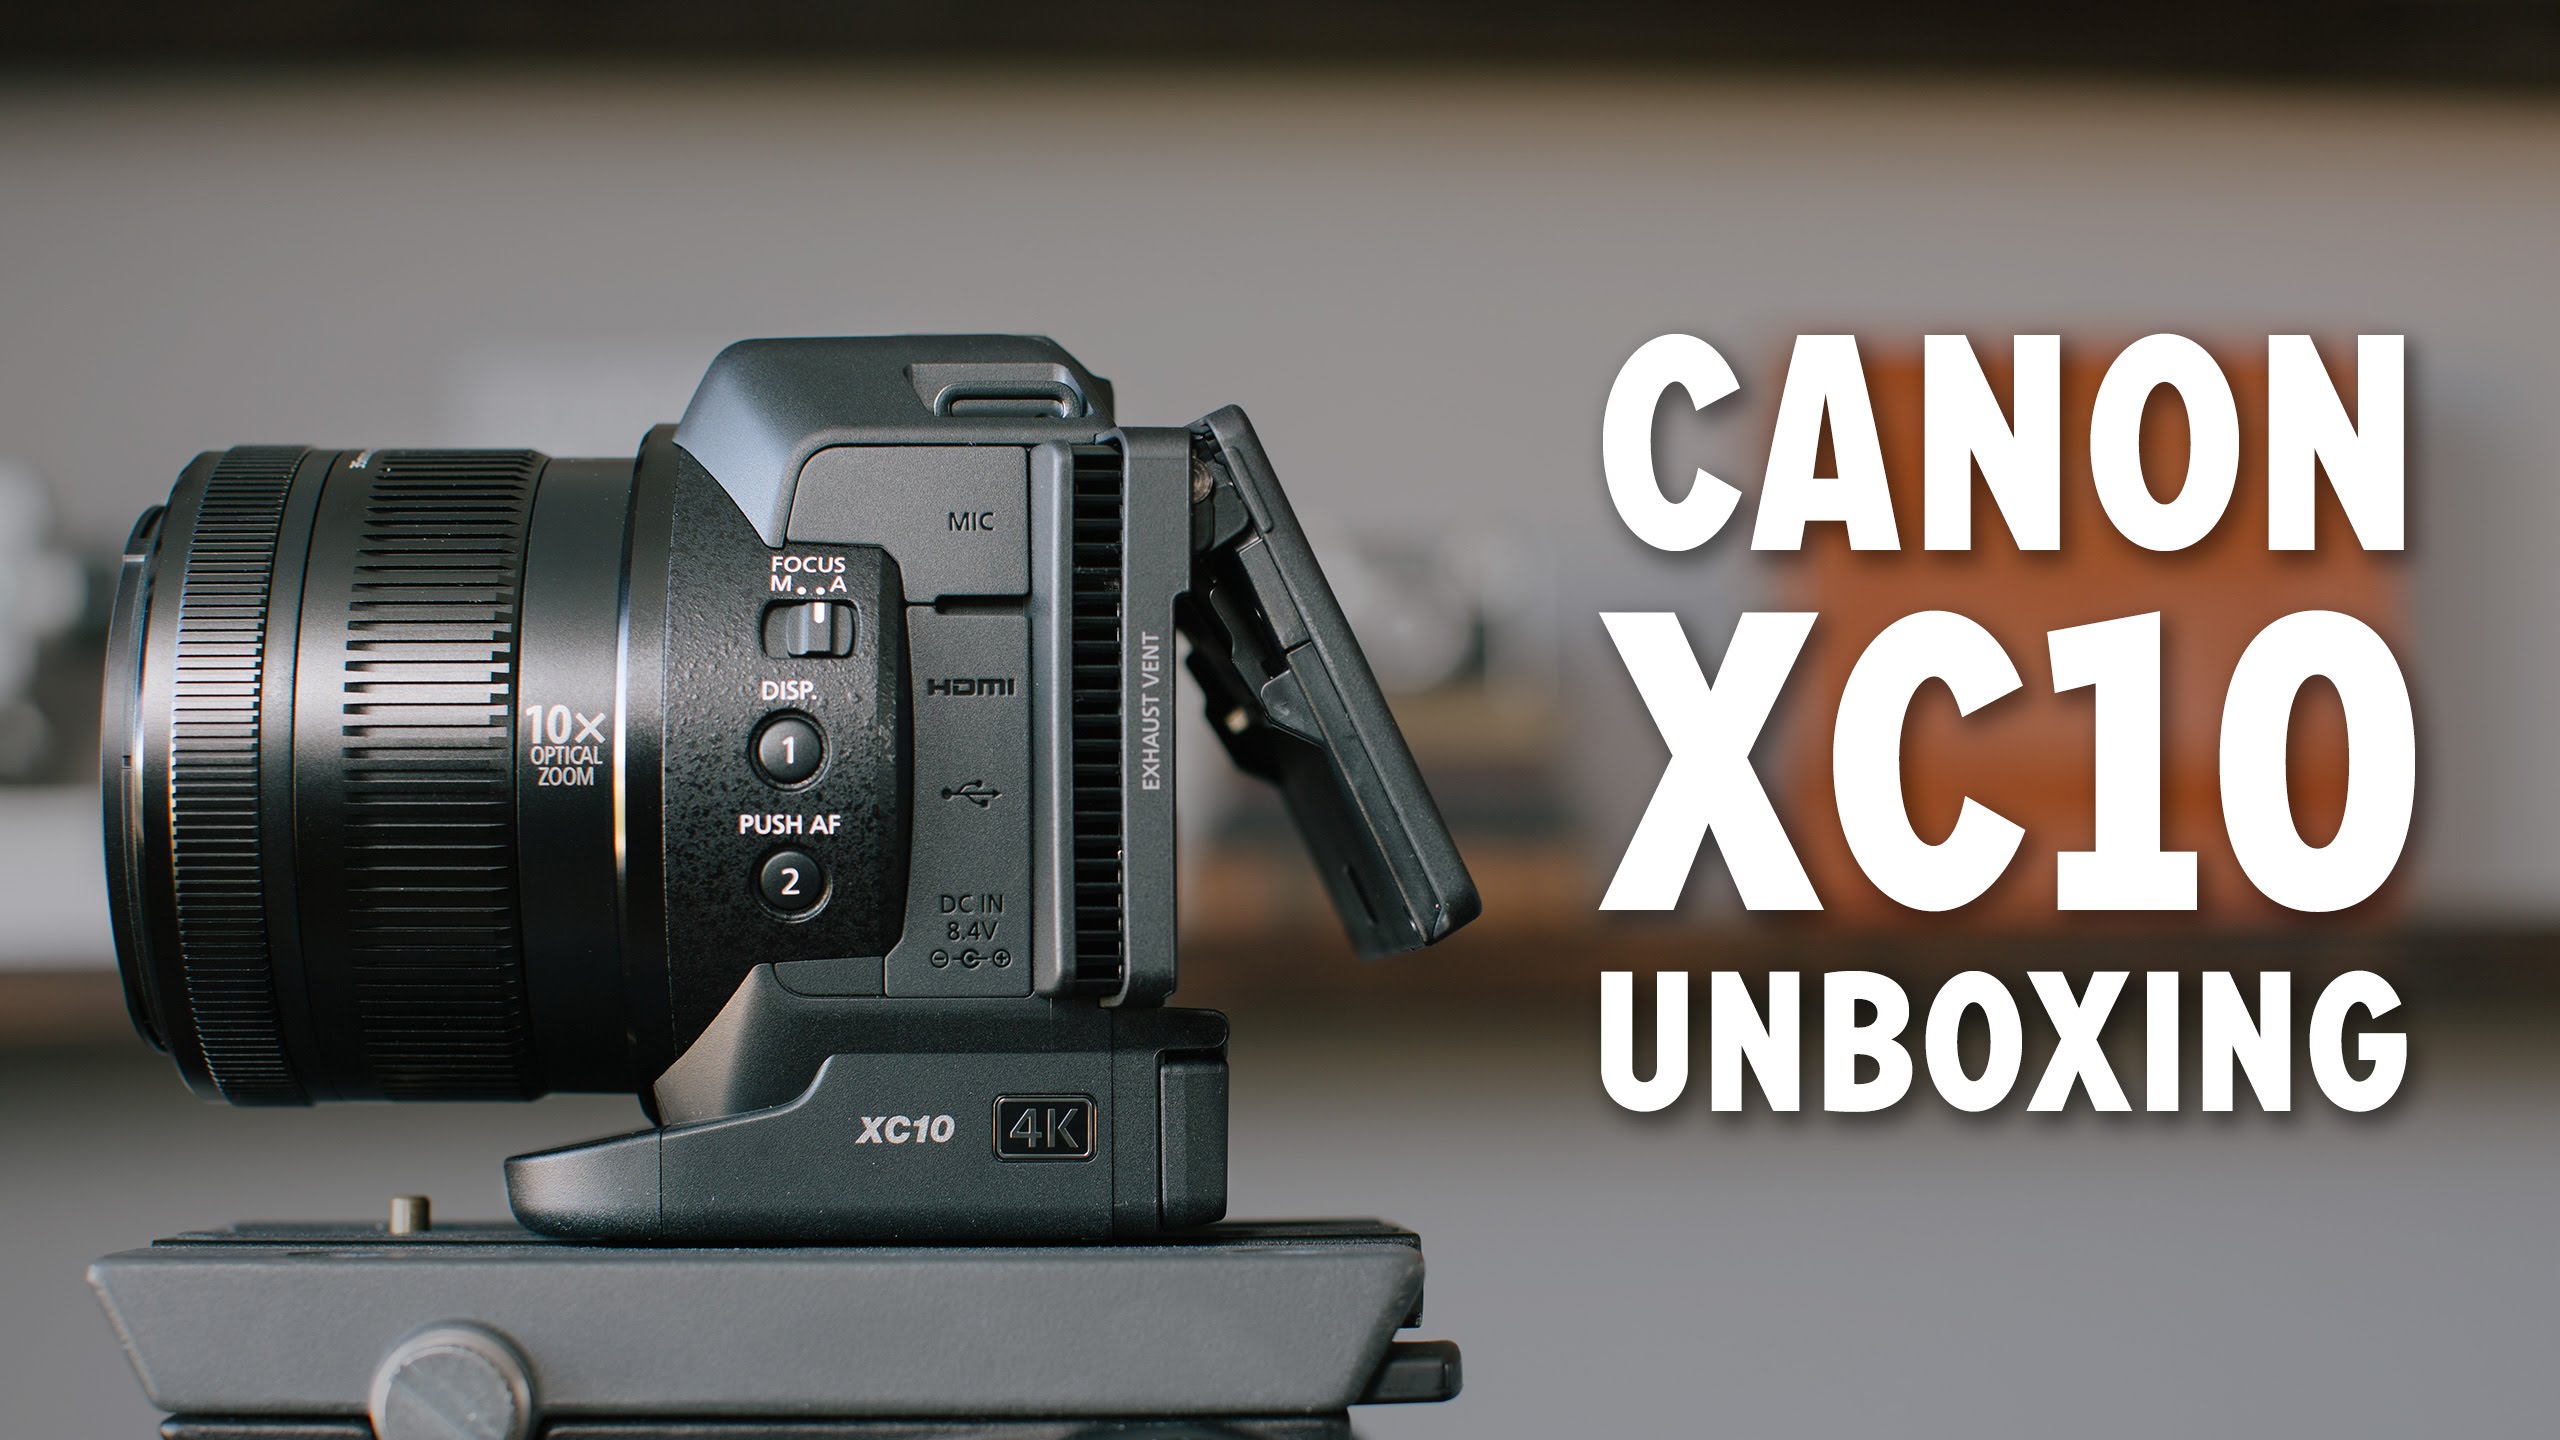 Unboxing Canon’s XC10 (4K Video Camera)